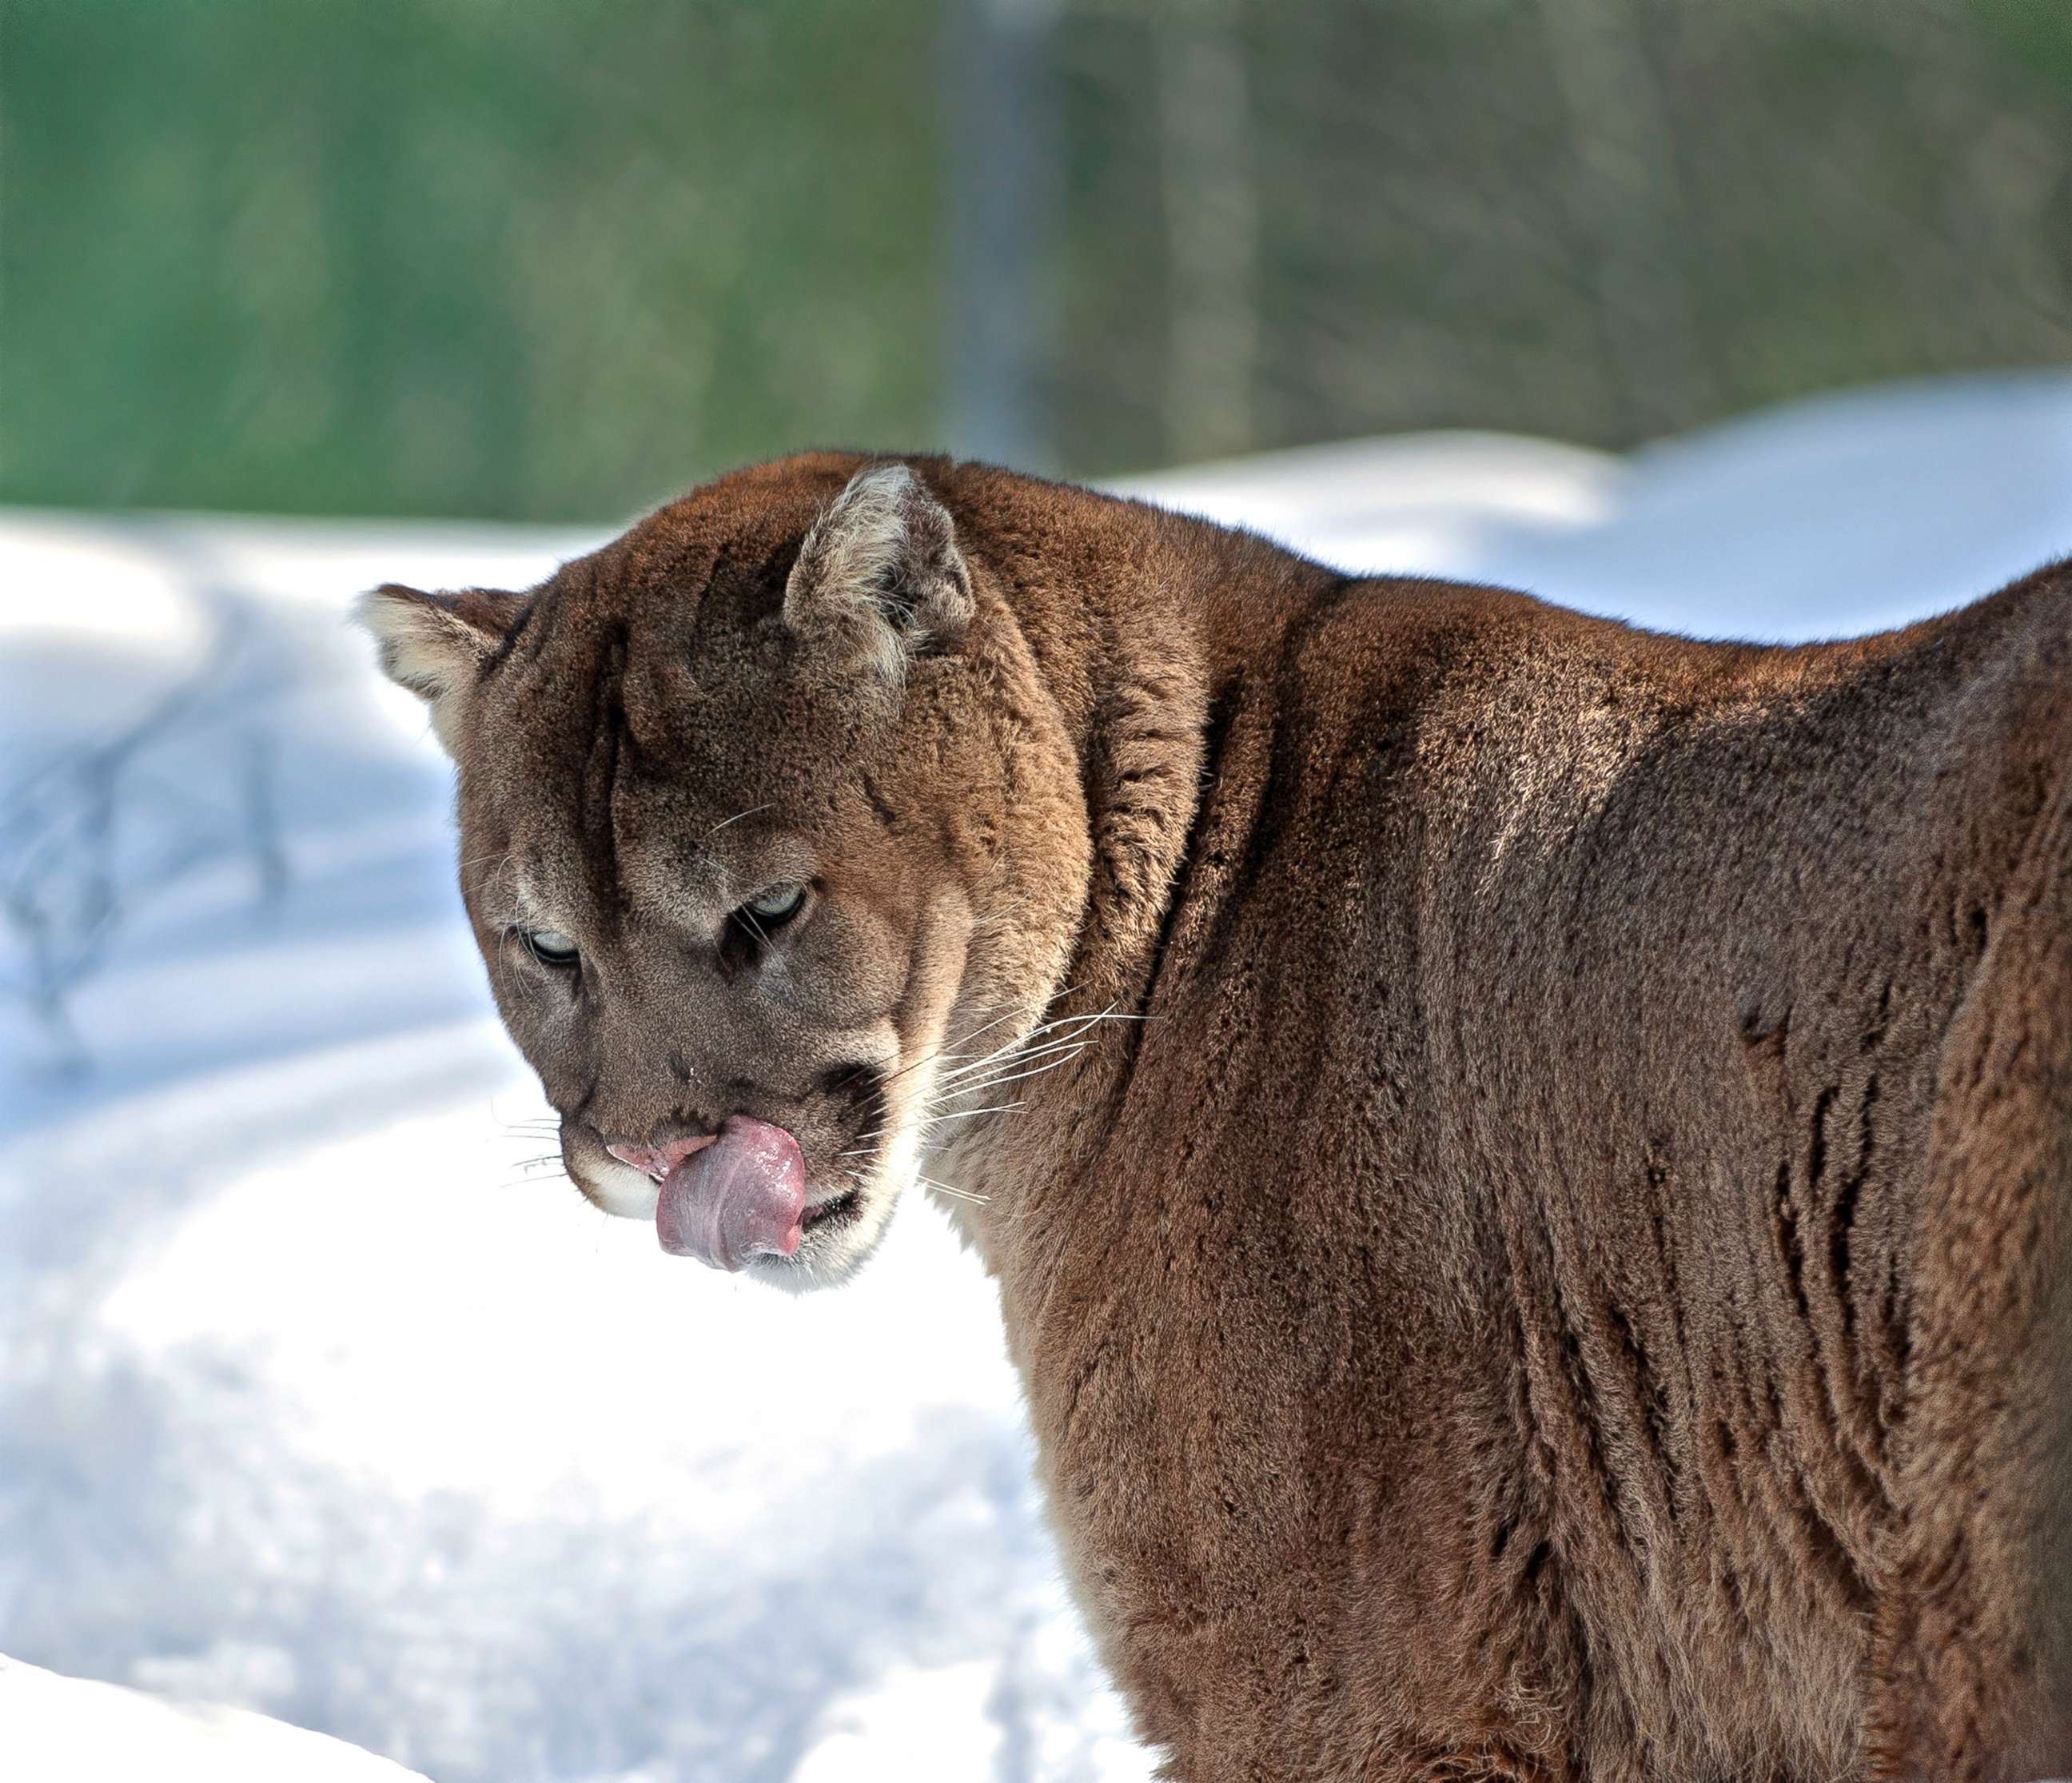 PHOTO: A mountain lion is pictured in Northern Ontario, Canada.